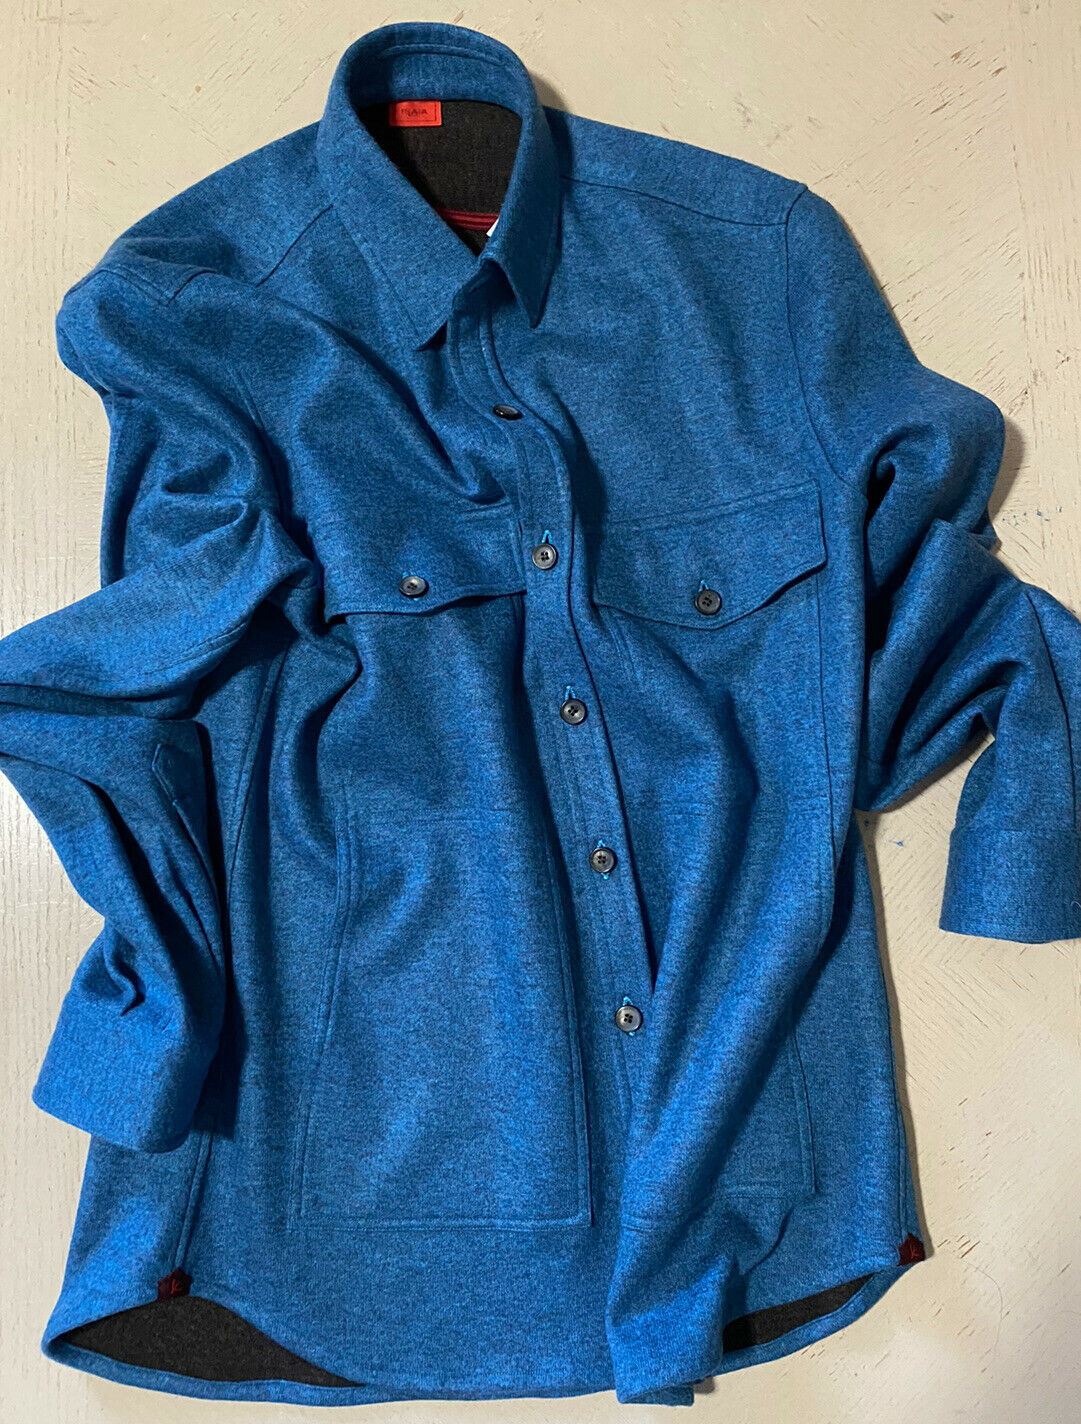 NWT $1350 Isaia Long Sleeve Cashmere Pullover Shirt Jacket Blue Size S-M